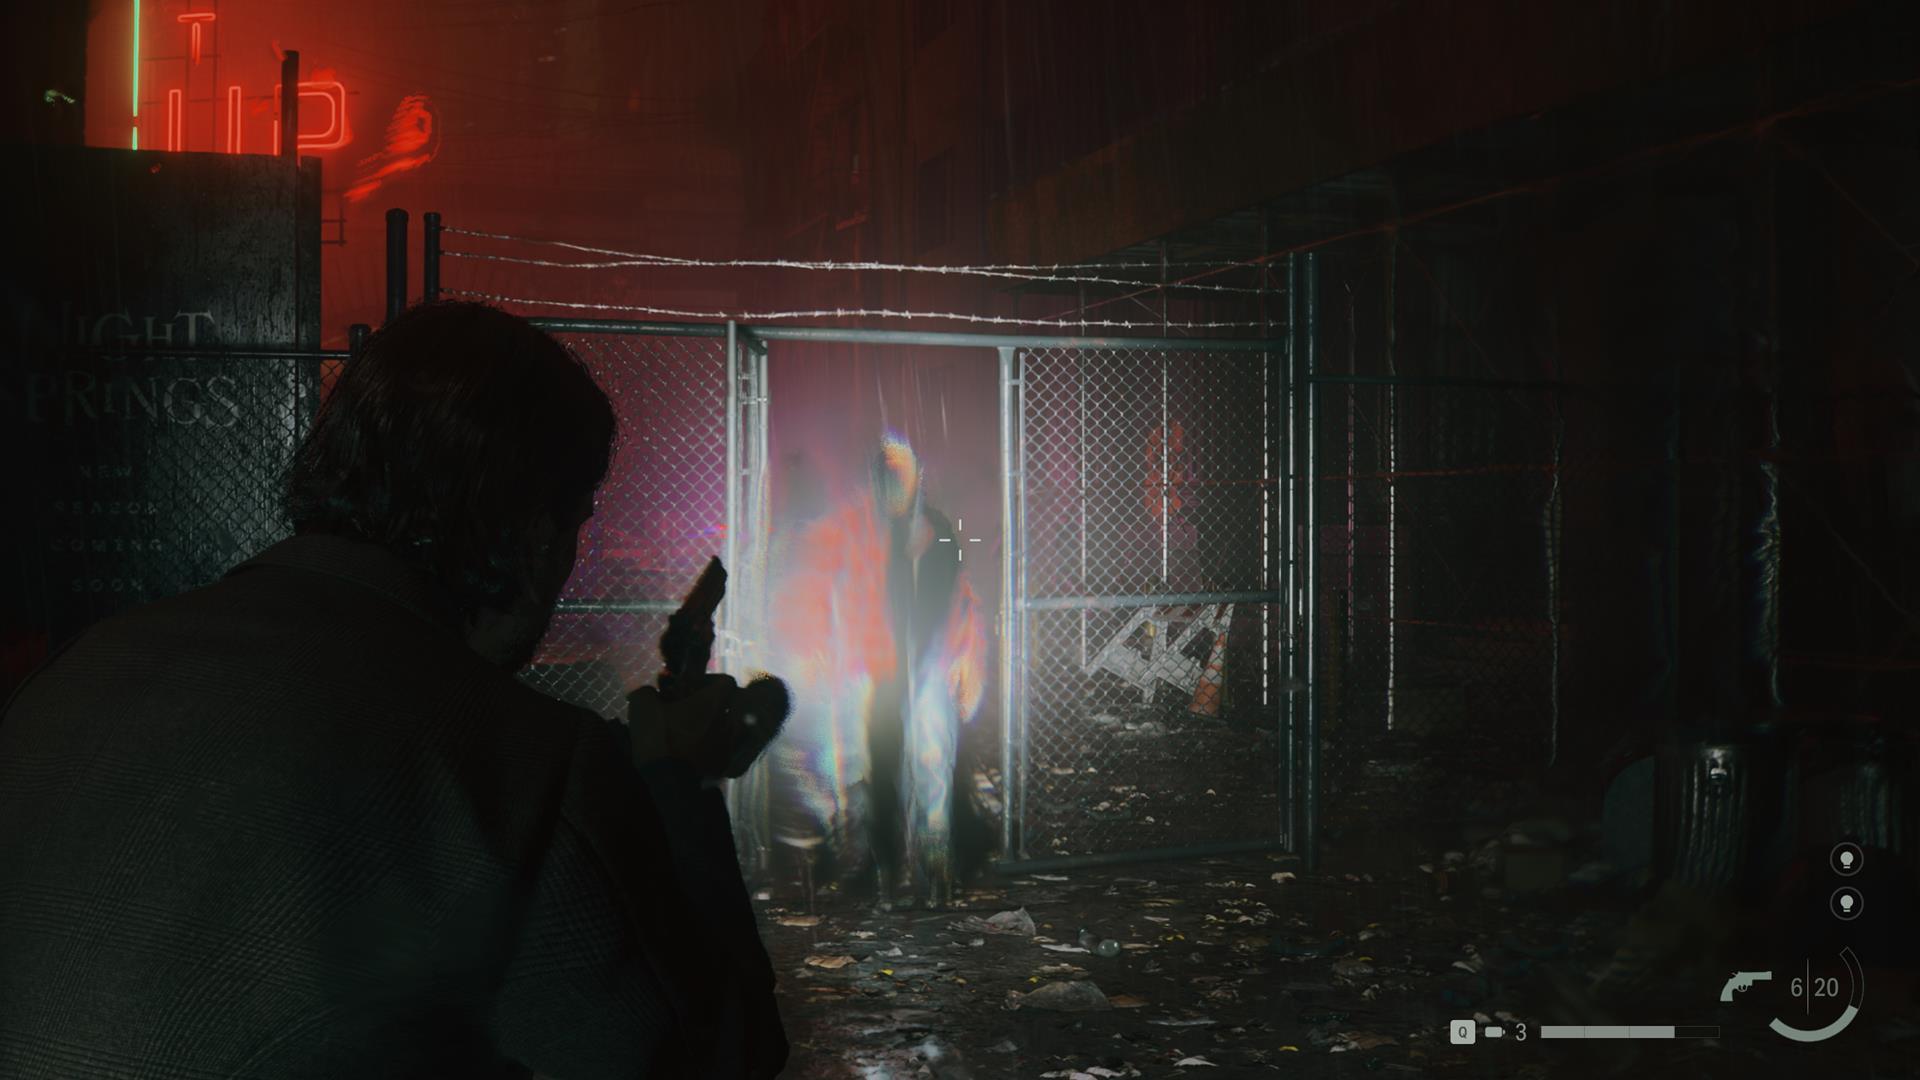 Alan Wake 2 PC Requirements Are Very Demanding Even Without Ray